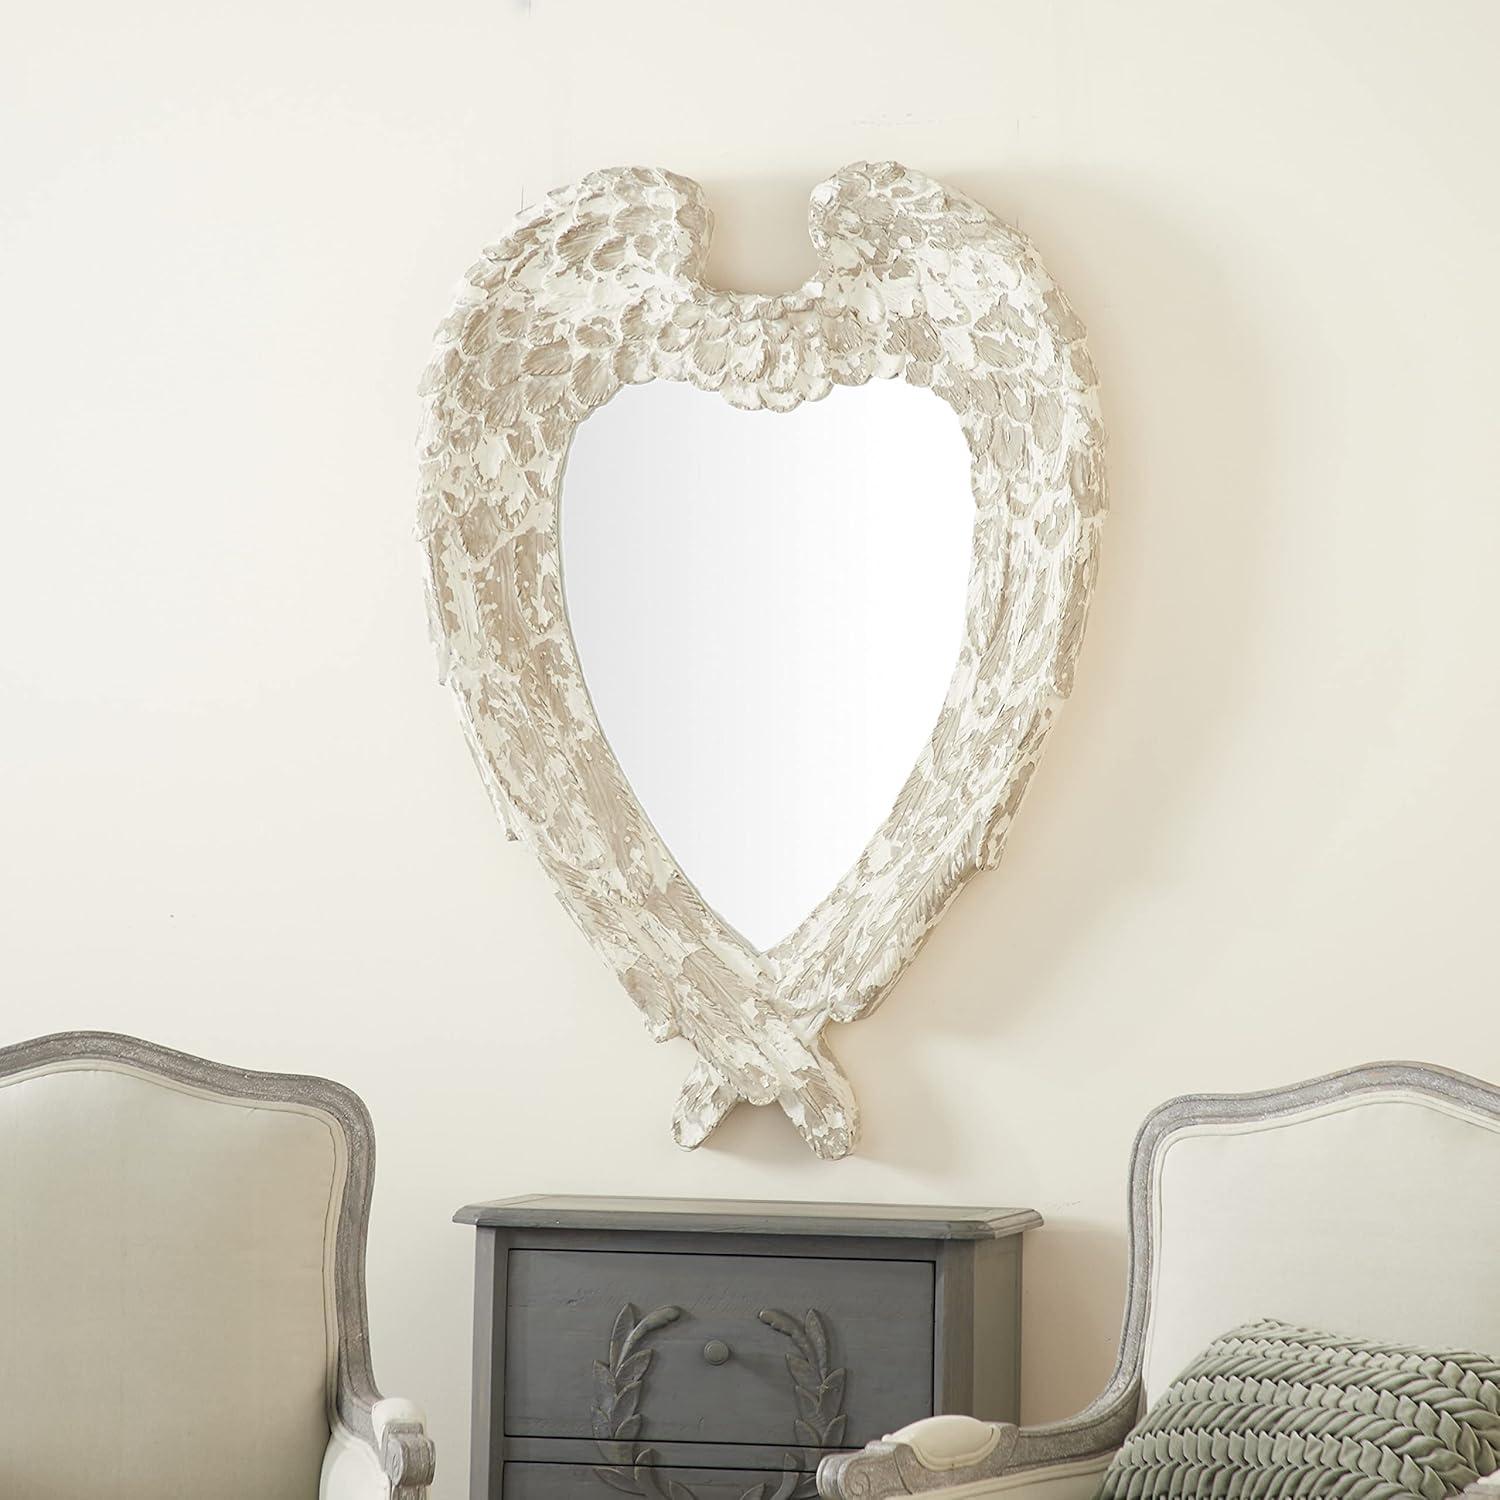 Angelica White Oval Wood Vanity Wall Mirror 31.5" x 44"